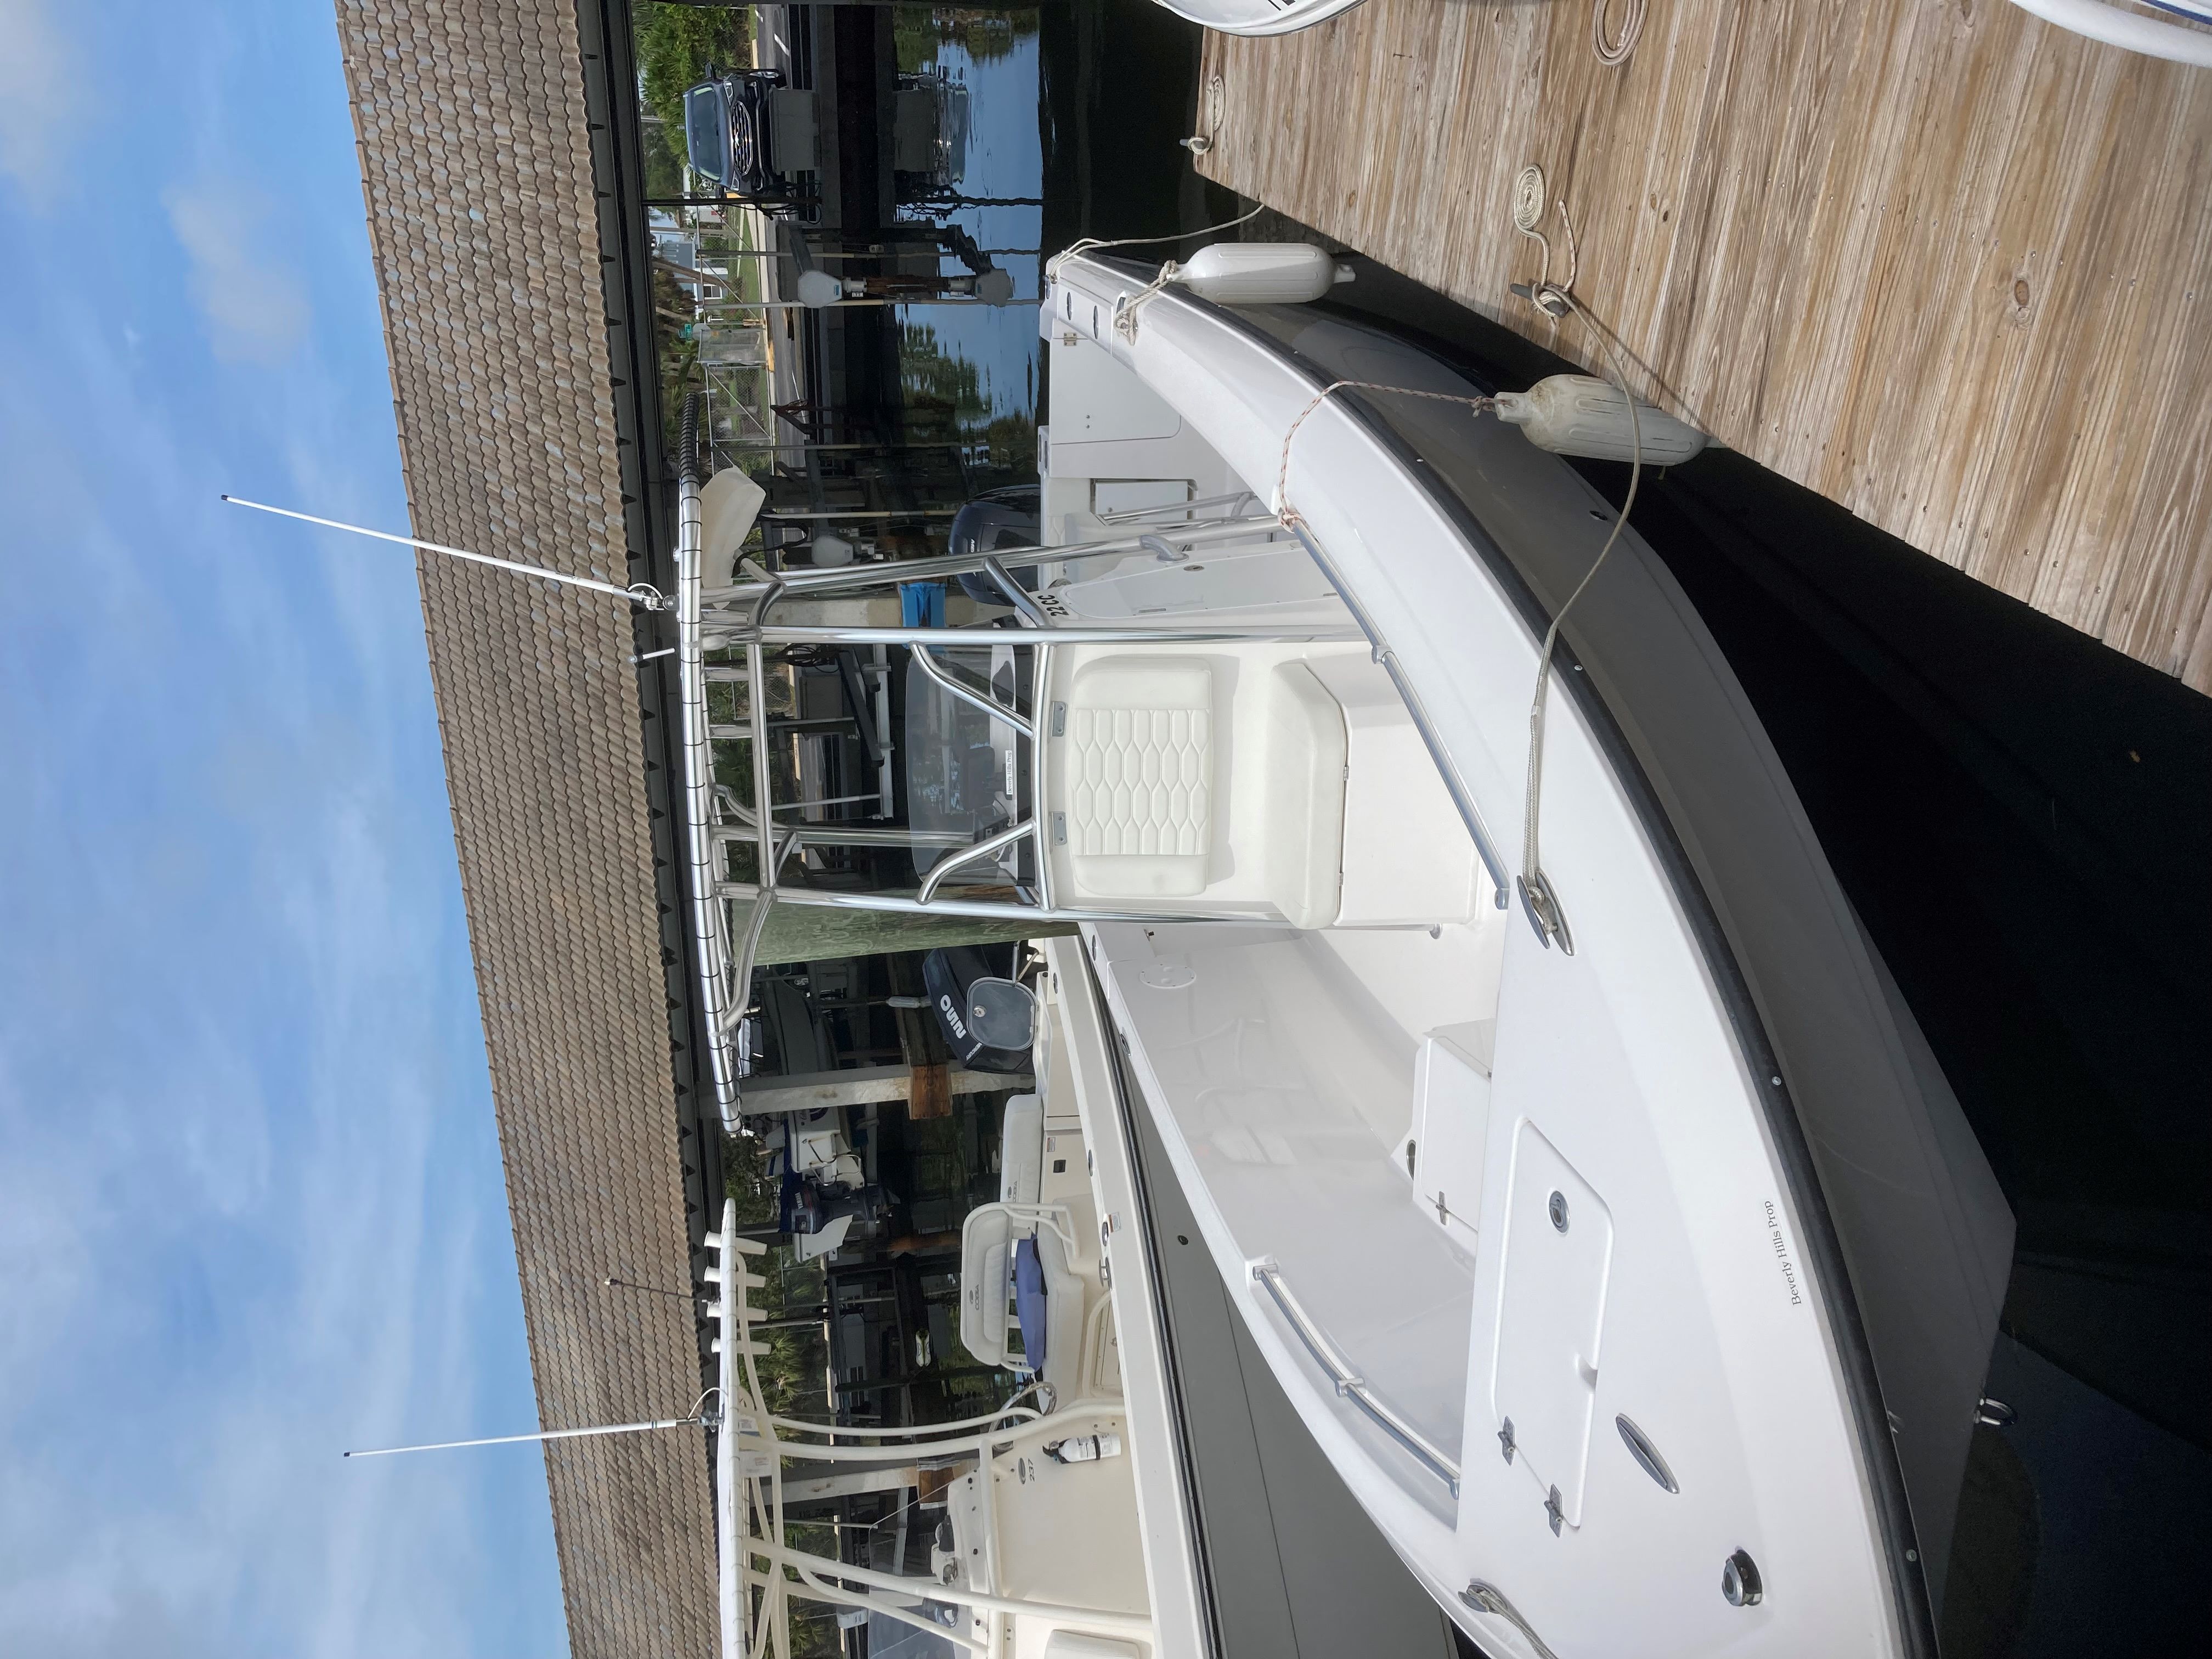 BEVERLY HILLS PROP (22' Offshore Center Console 150HP - Fishing)